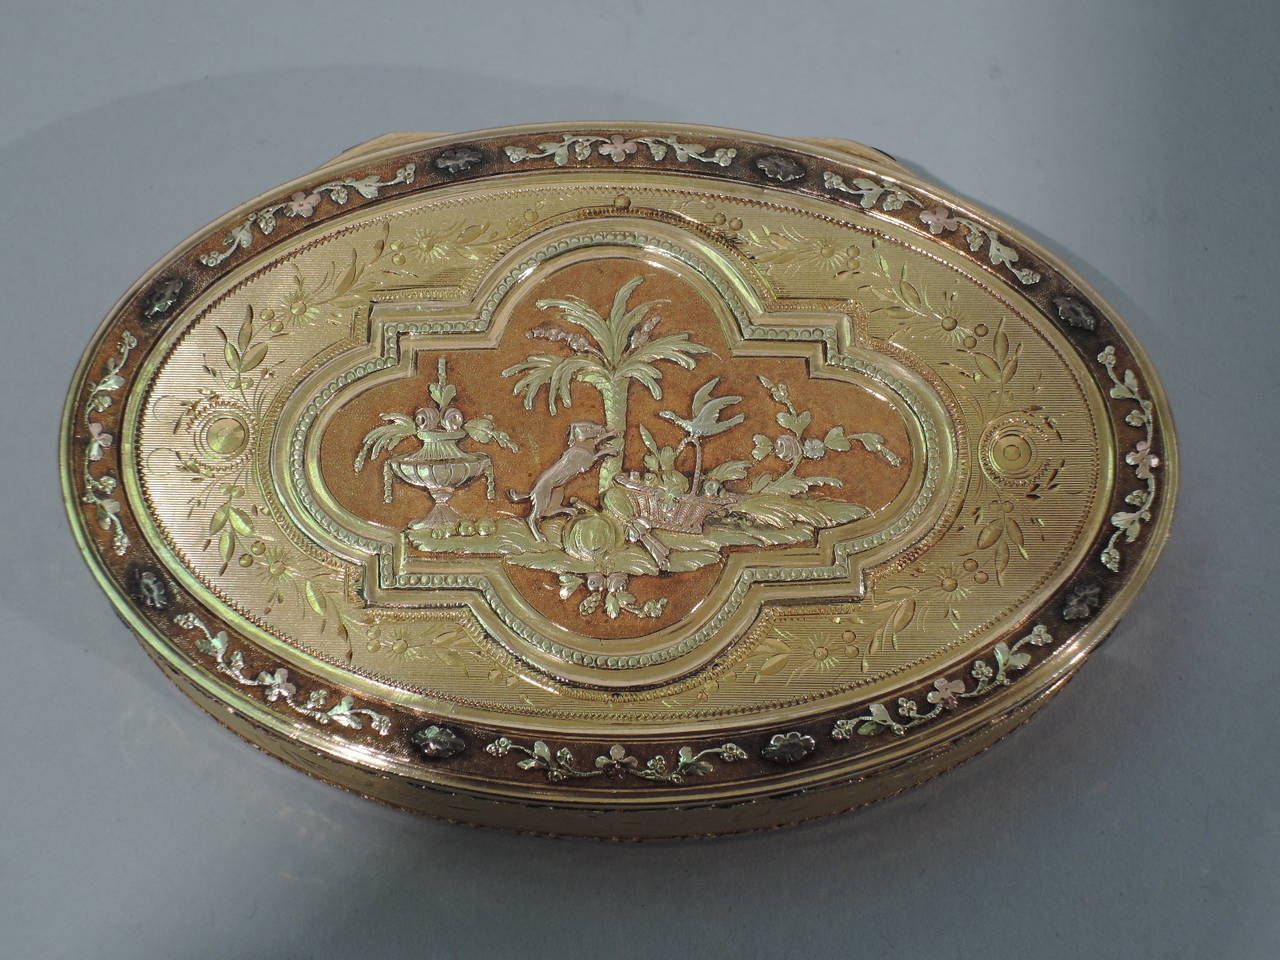 Swiss 20-karat gold snuffbox, circa 1810. Oval with hinged cover. Ornament in three-color gold. On cover are a Grecian lamp vase, wicker basket, dog, and bird. On bottom are a floral garland and baluster vase. Fine craftsmanship and rich patina.